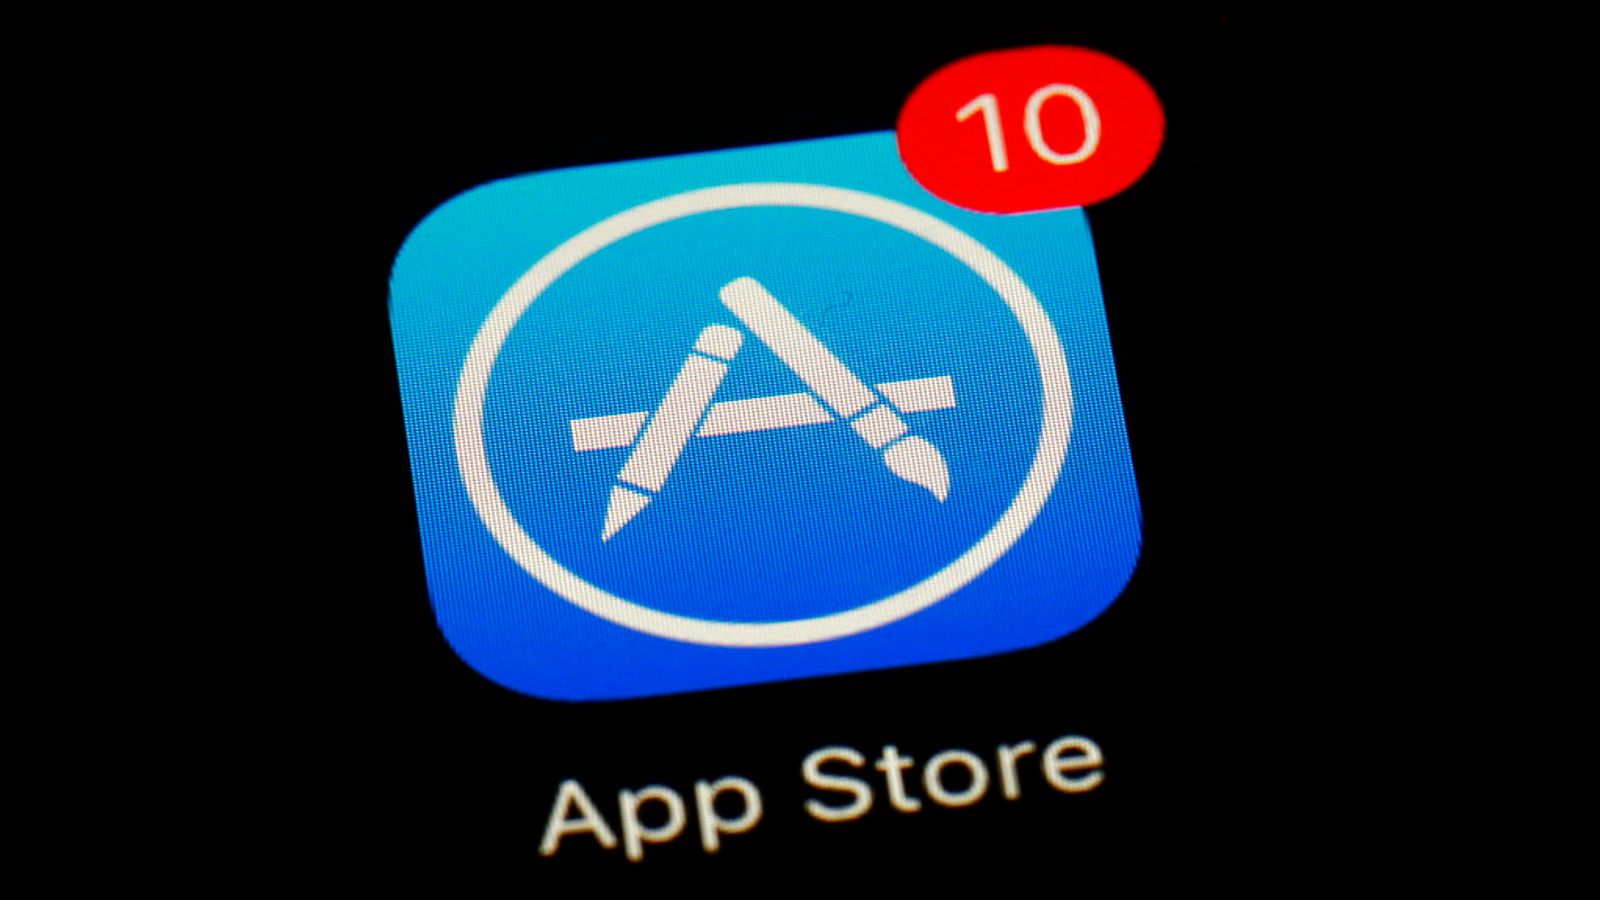 Apple says App Store rules support 330,000 UK jobs as it hits back at competition investigation